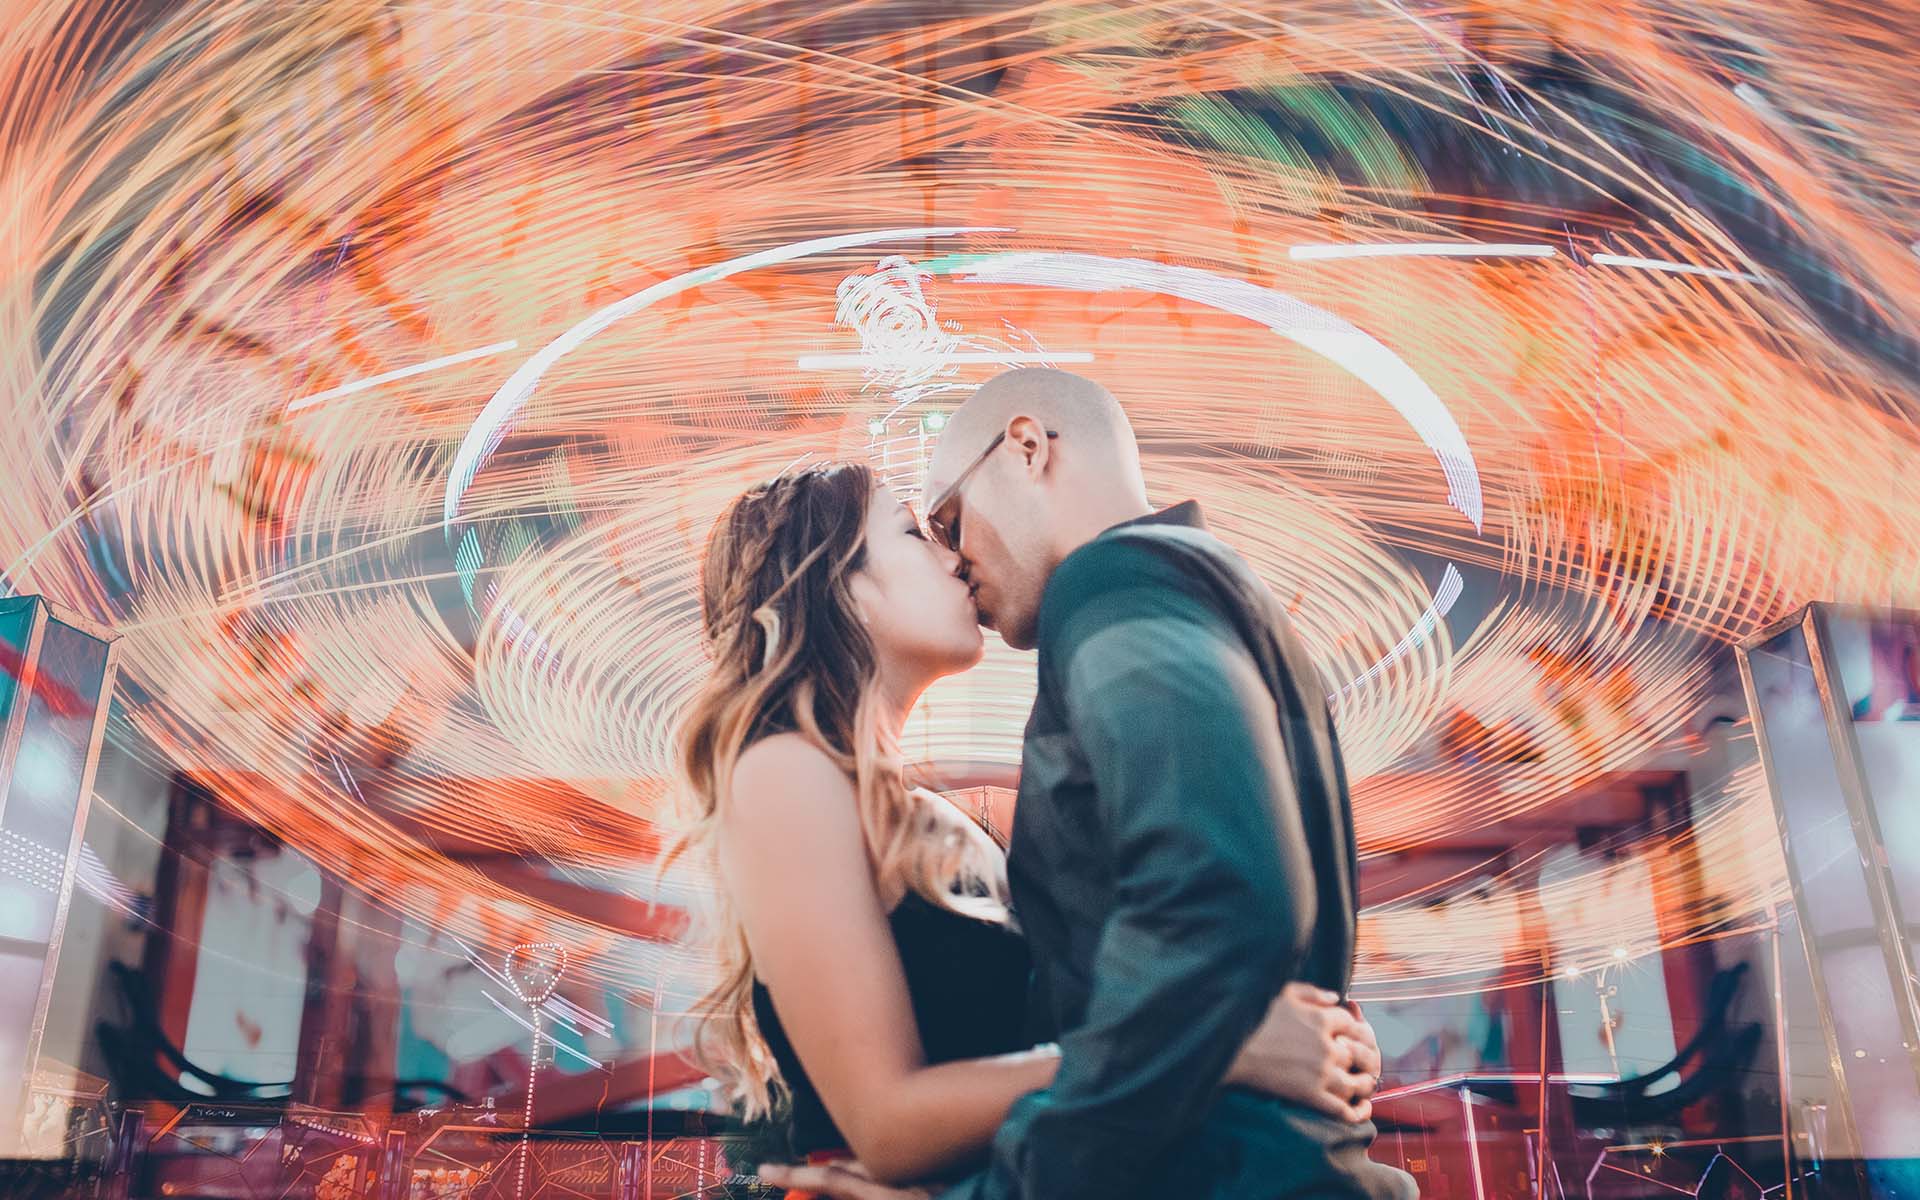 Orange County Fair engagement session with slow shutter effect creating light painting rides